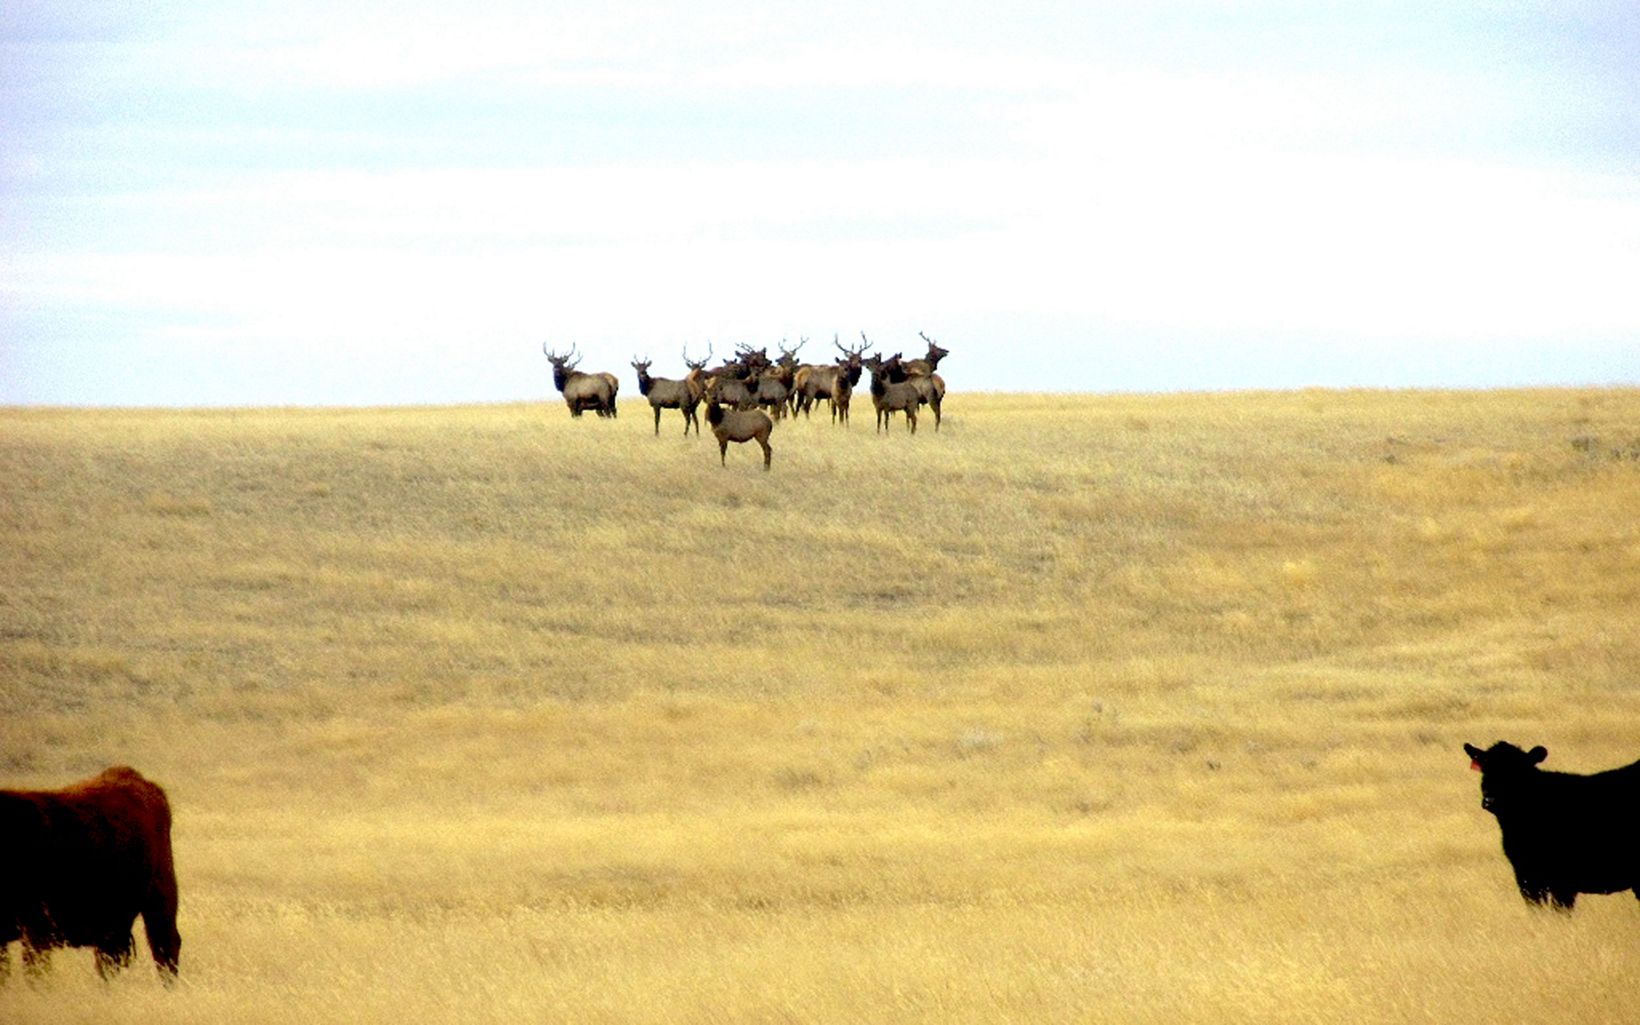 TNC’s goal is to conserve grassland through direct land protection and partnership with the local ranching community.